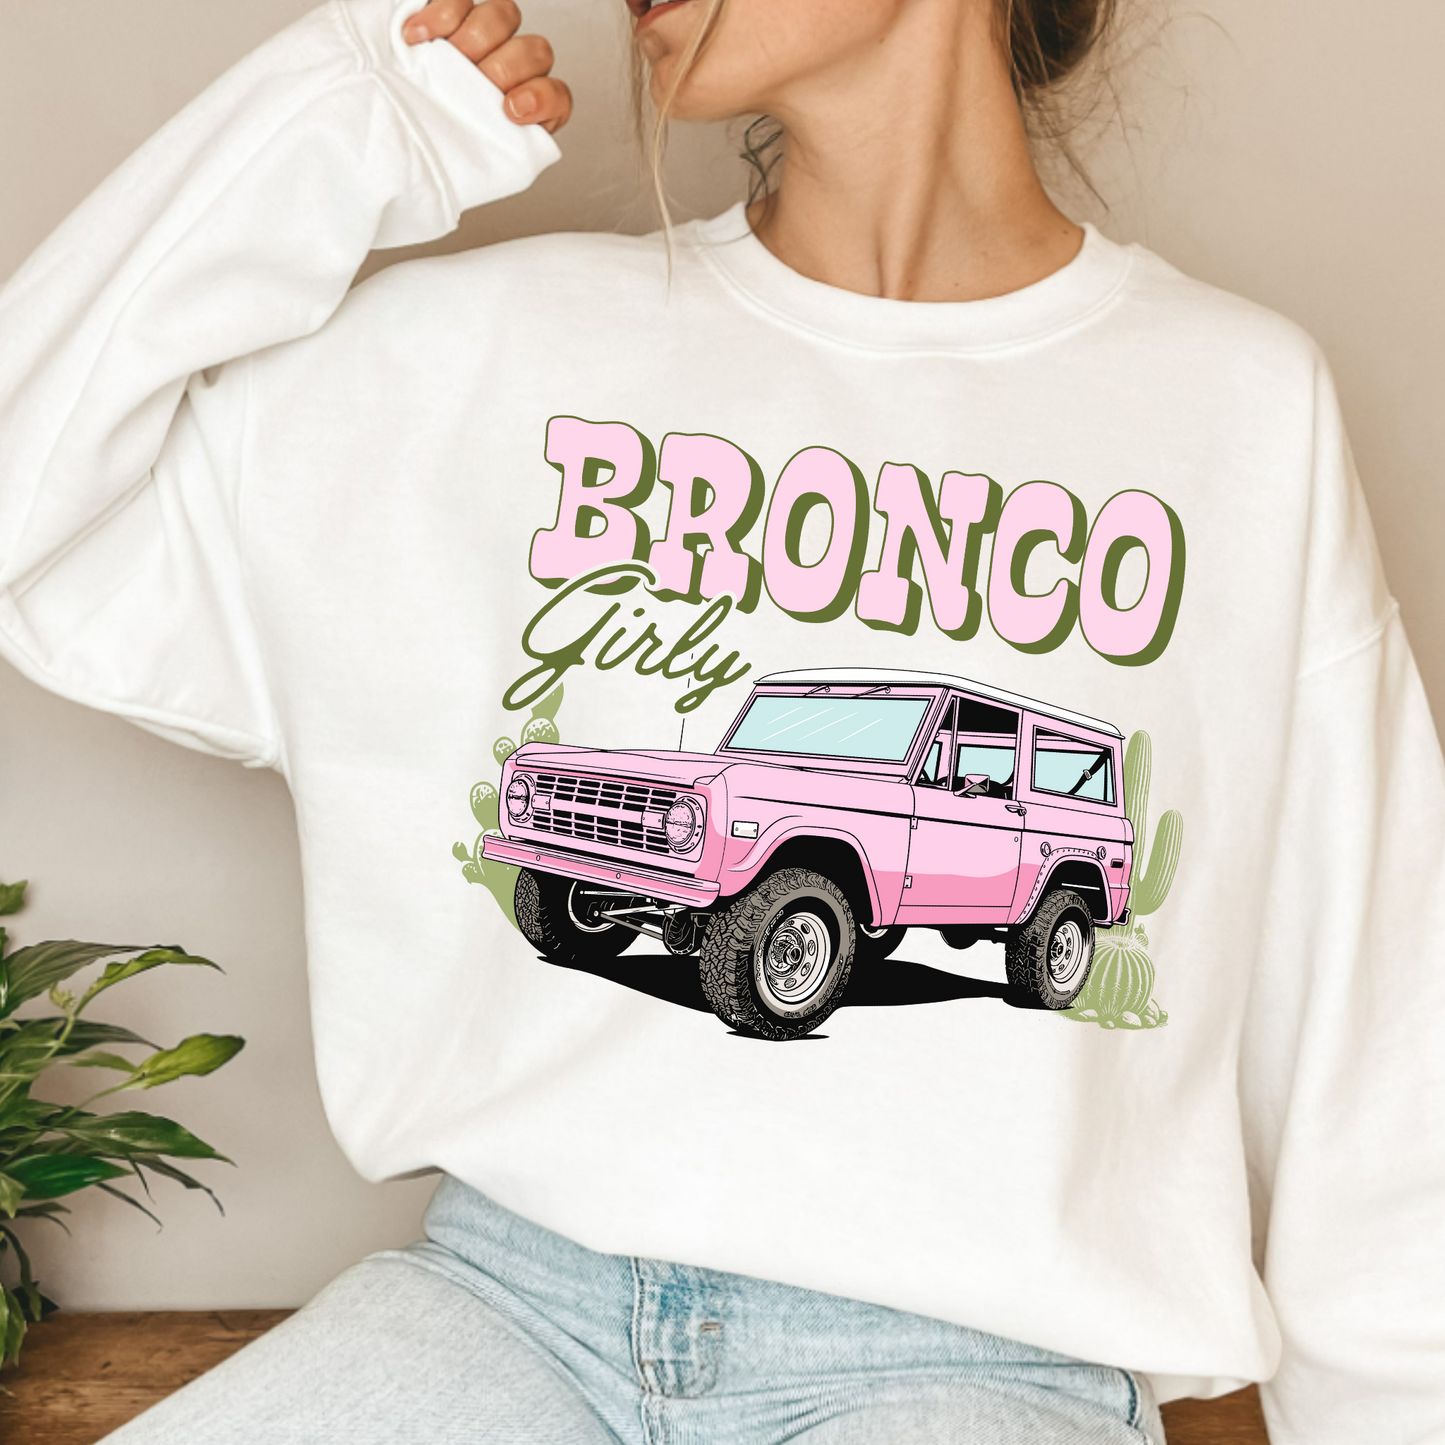 (shirt not included) Bronco Girly - Clear Film Transfer